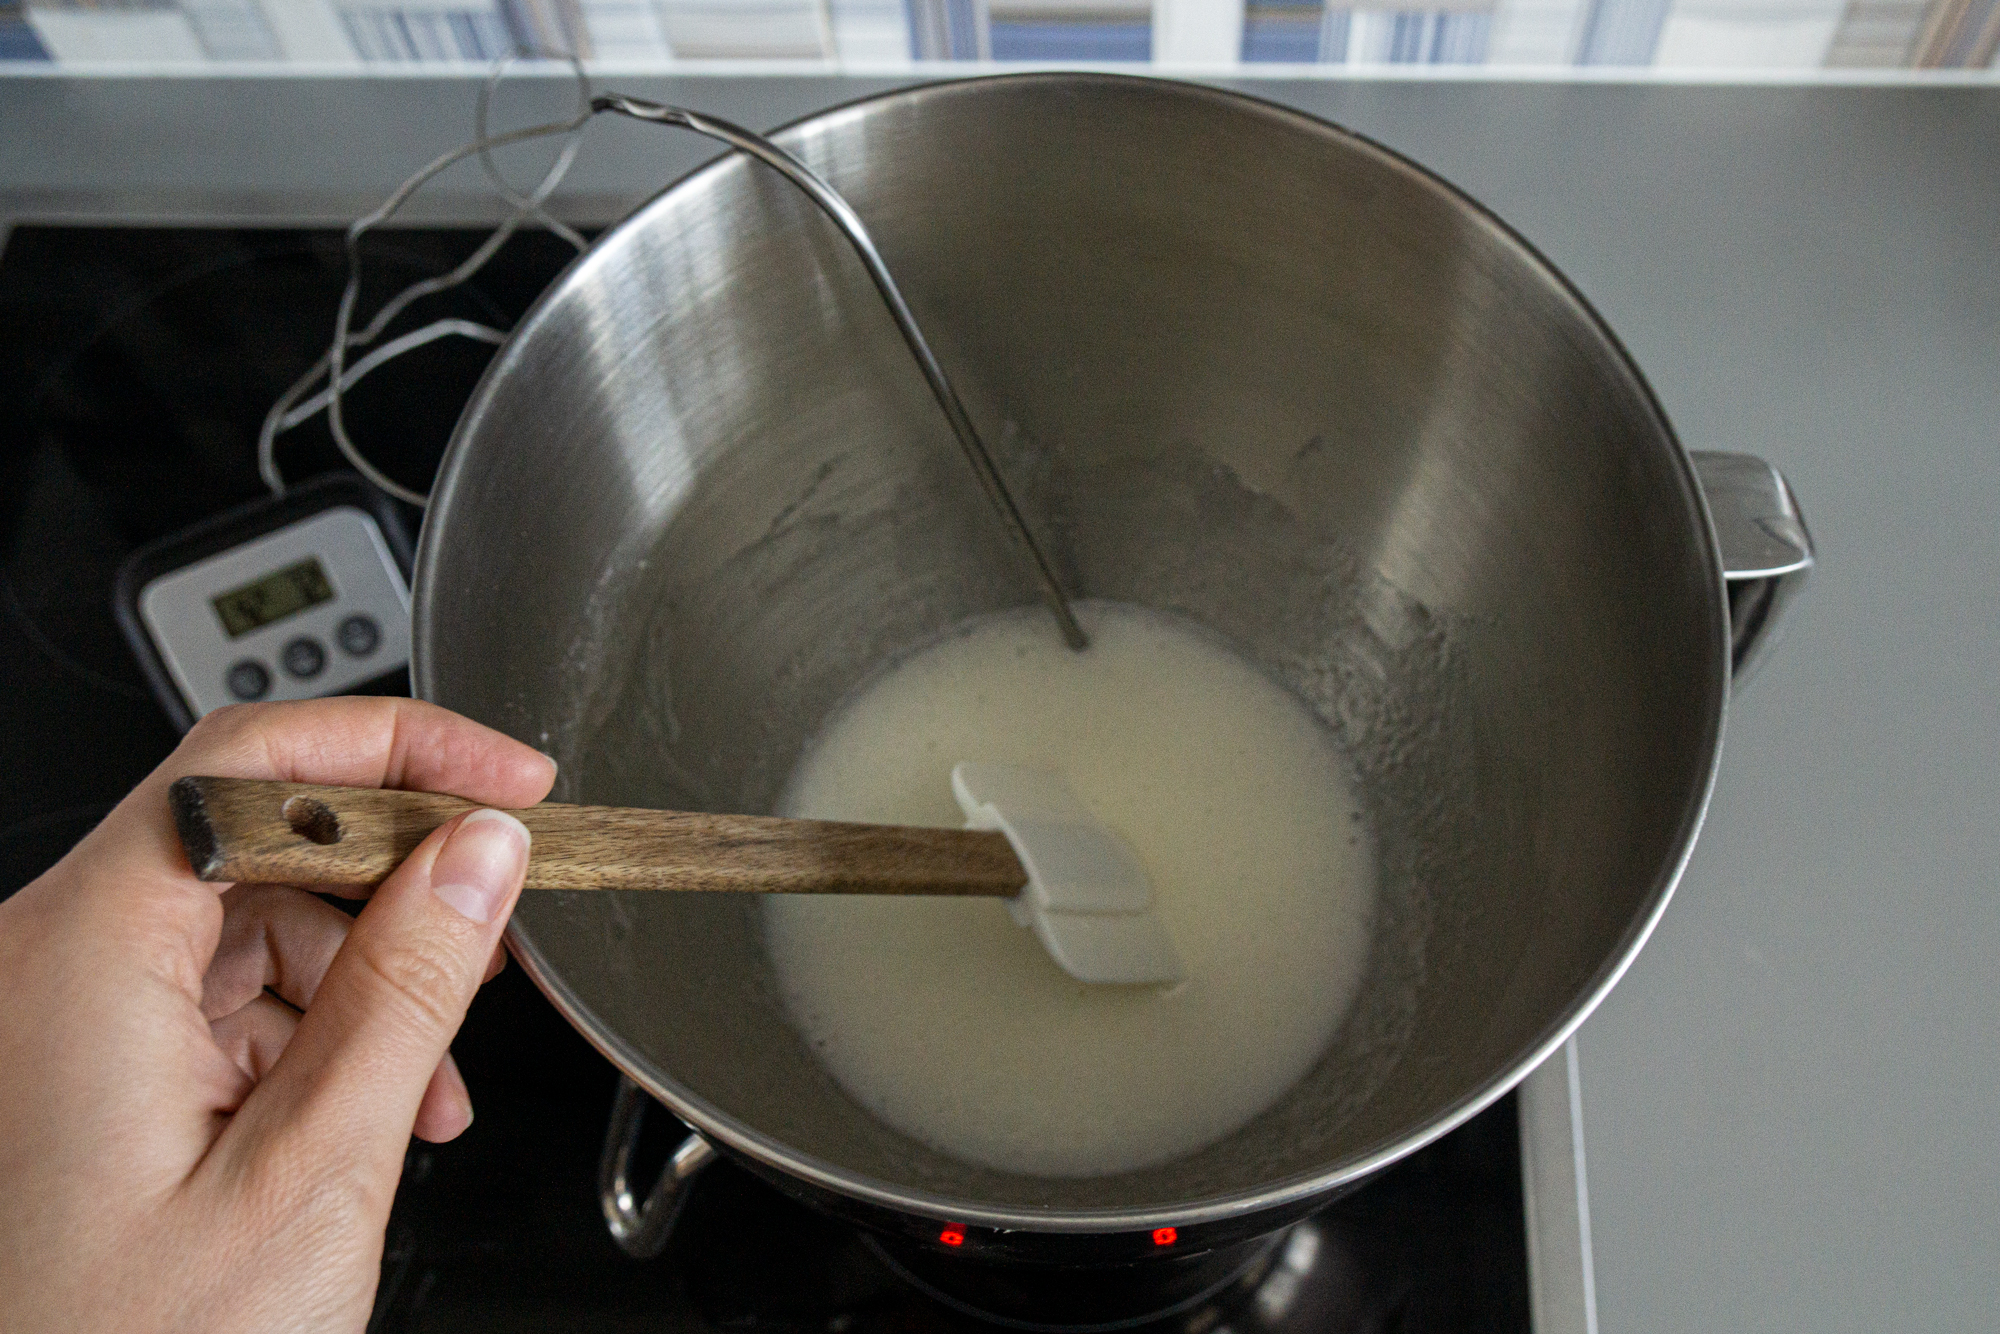 Heating egg whites with sugar